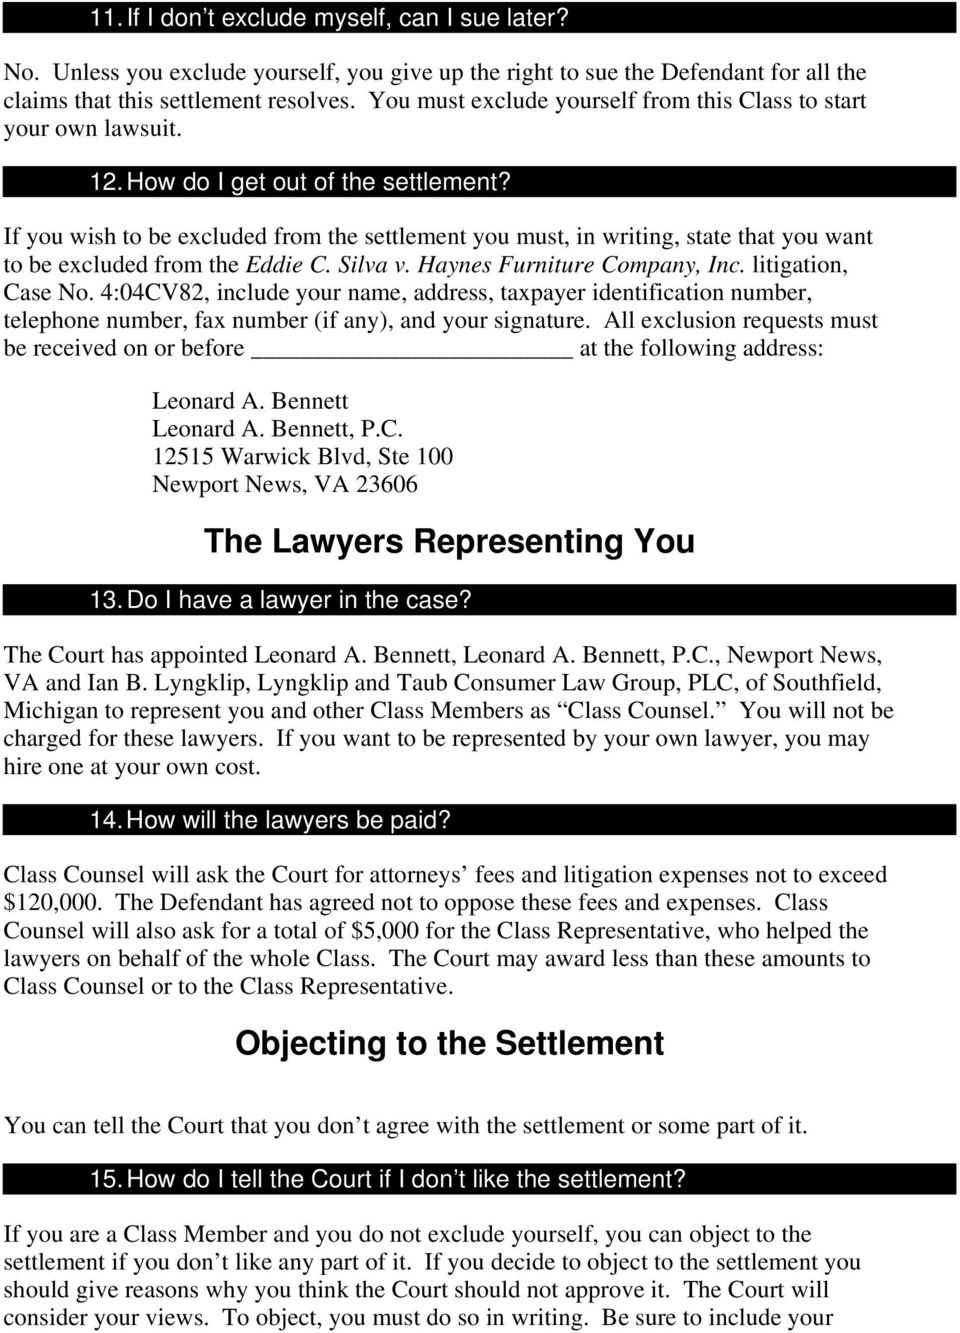 If you wish to be excluded from the settlement you must, in writing, state that you want to be excluded from the Eddie C. Silva v. Haynes Furniture Company, Inc. litigation, Case No.